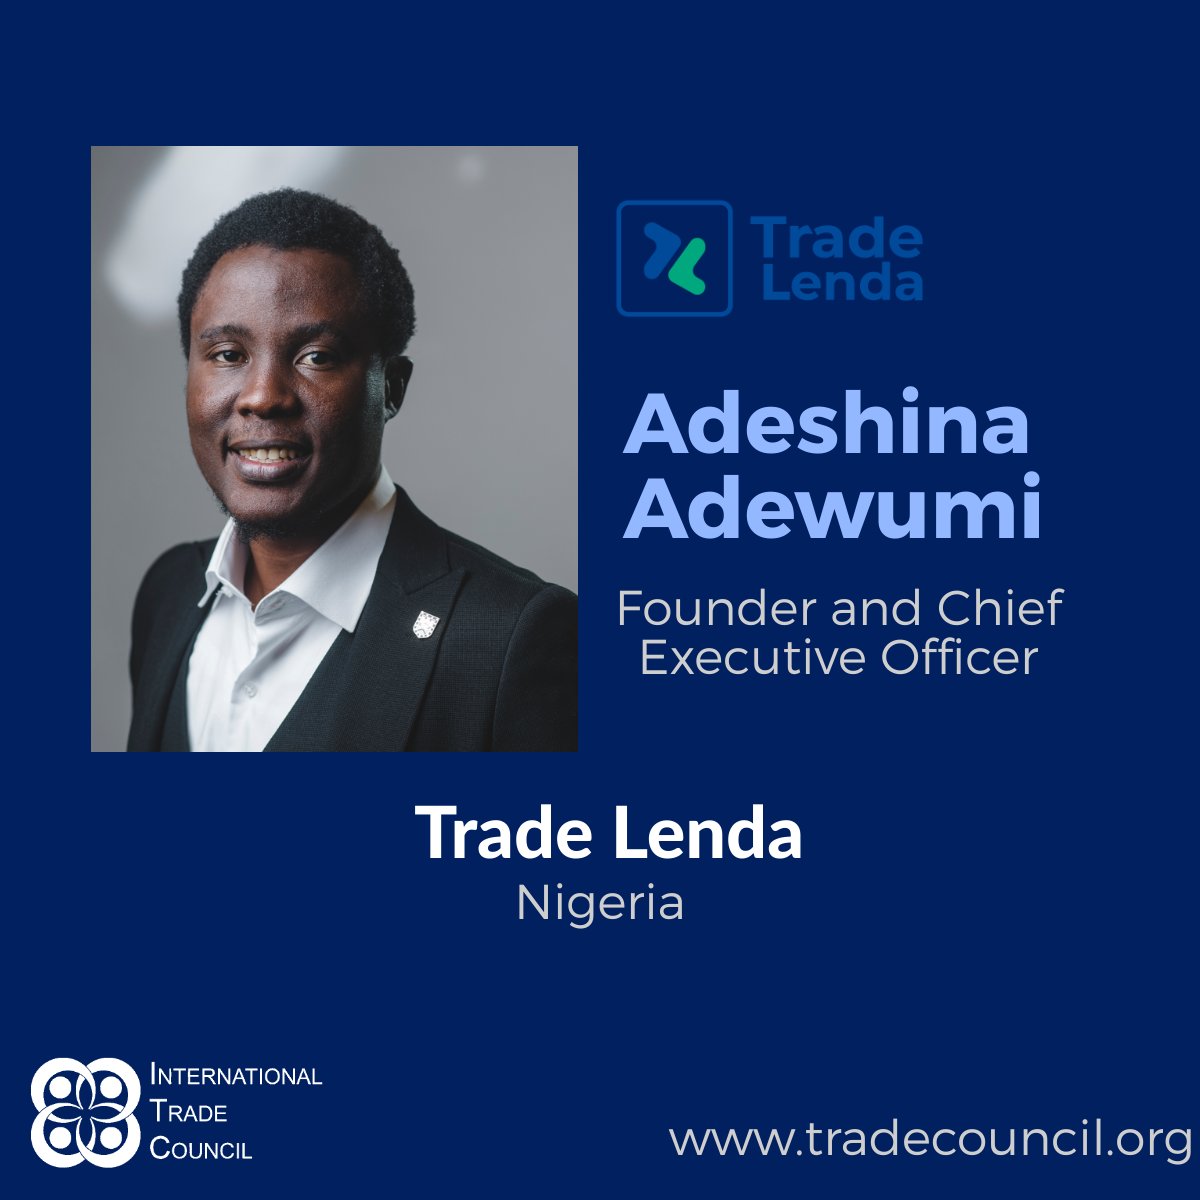 🌍 ITC Featured Member of the Day ✨
Introducing the esteemed members of the International Trade Council!

Meet Adeshina Adewumi, Founder and CEO of TradeLenda (@TradeLenda).

Discover his inspiring journey here: tradecouncil.org/adeshina_adewu…

#ITC